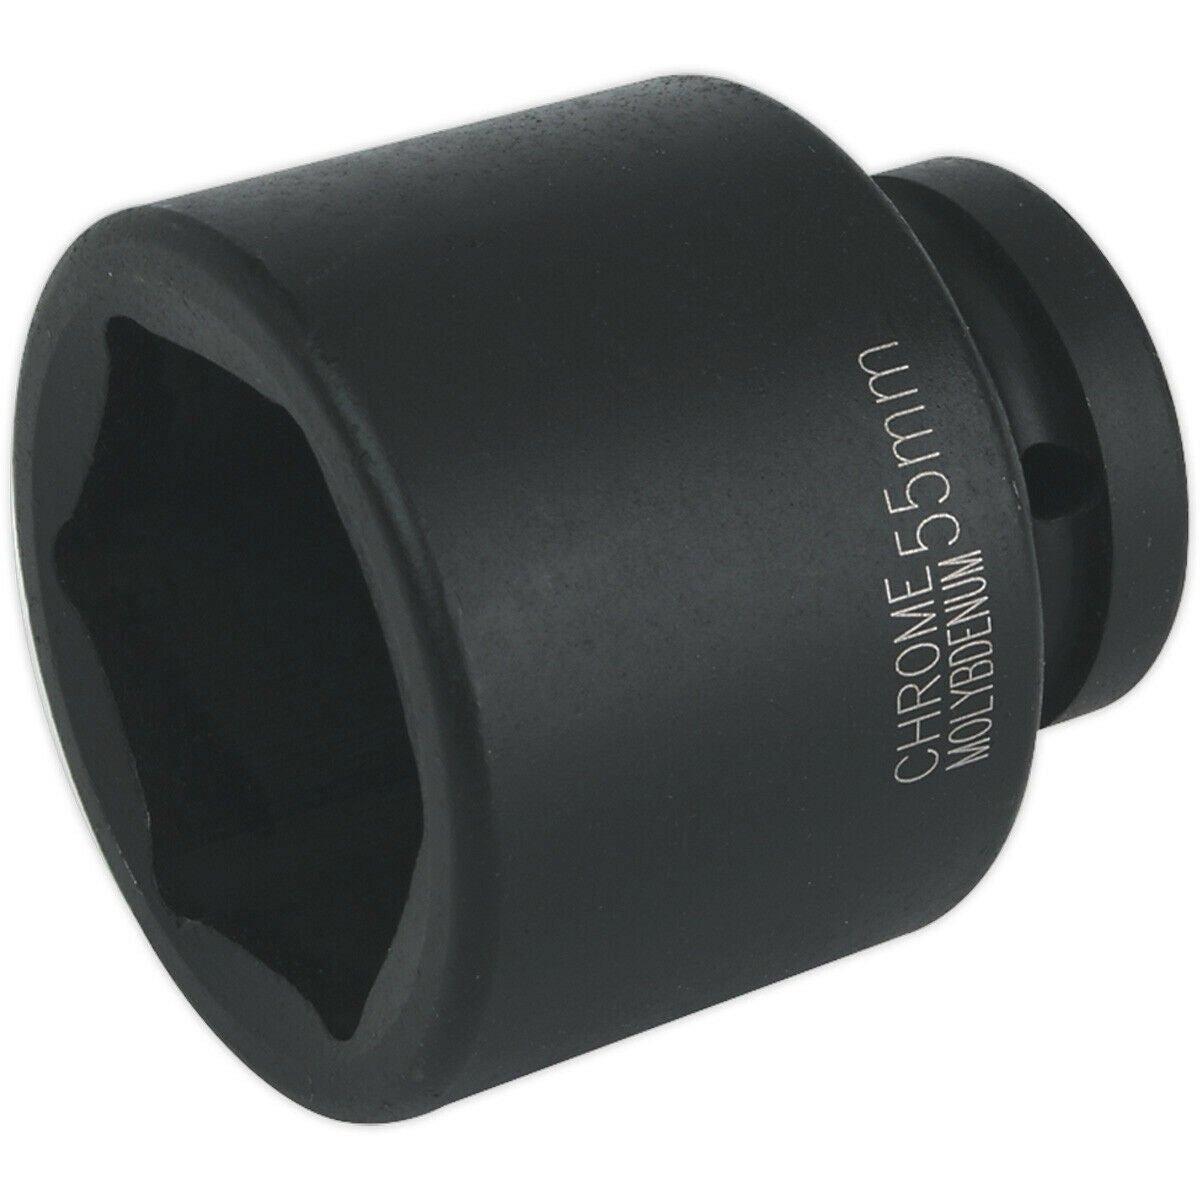 55mm Forged Impact Socket - 1 Inch Sq Drive - Chromoly Impact Wrench Socket